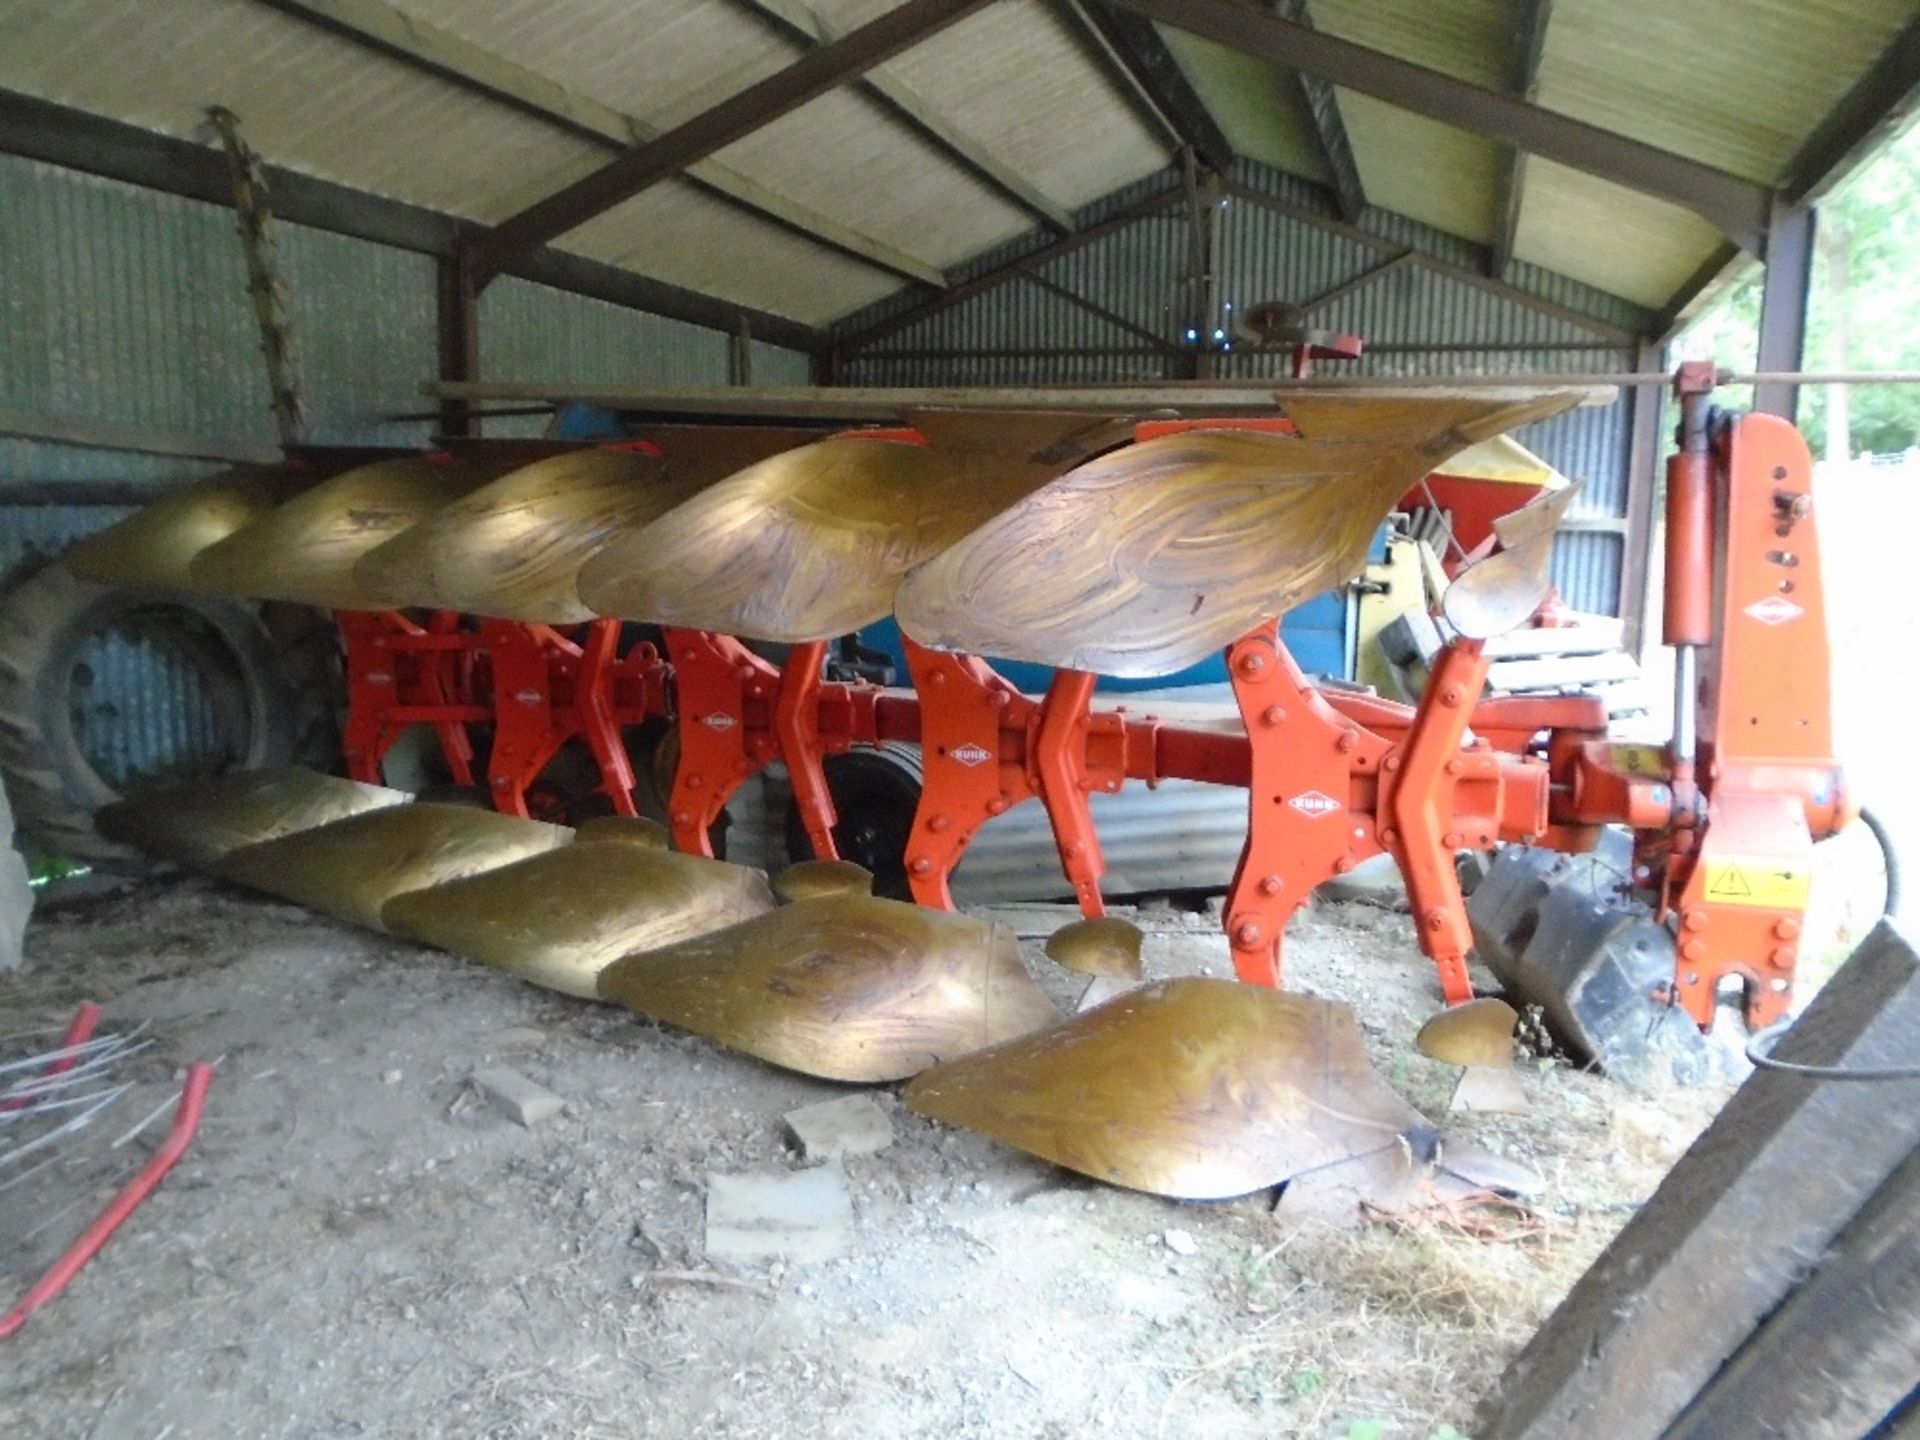 2012 Kuhn multi master 5 furrow plough, done approx. 500 acres